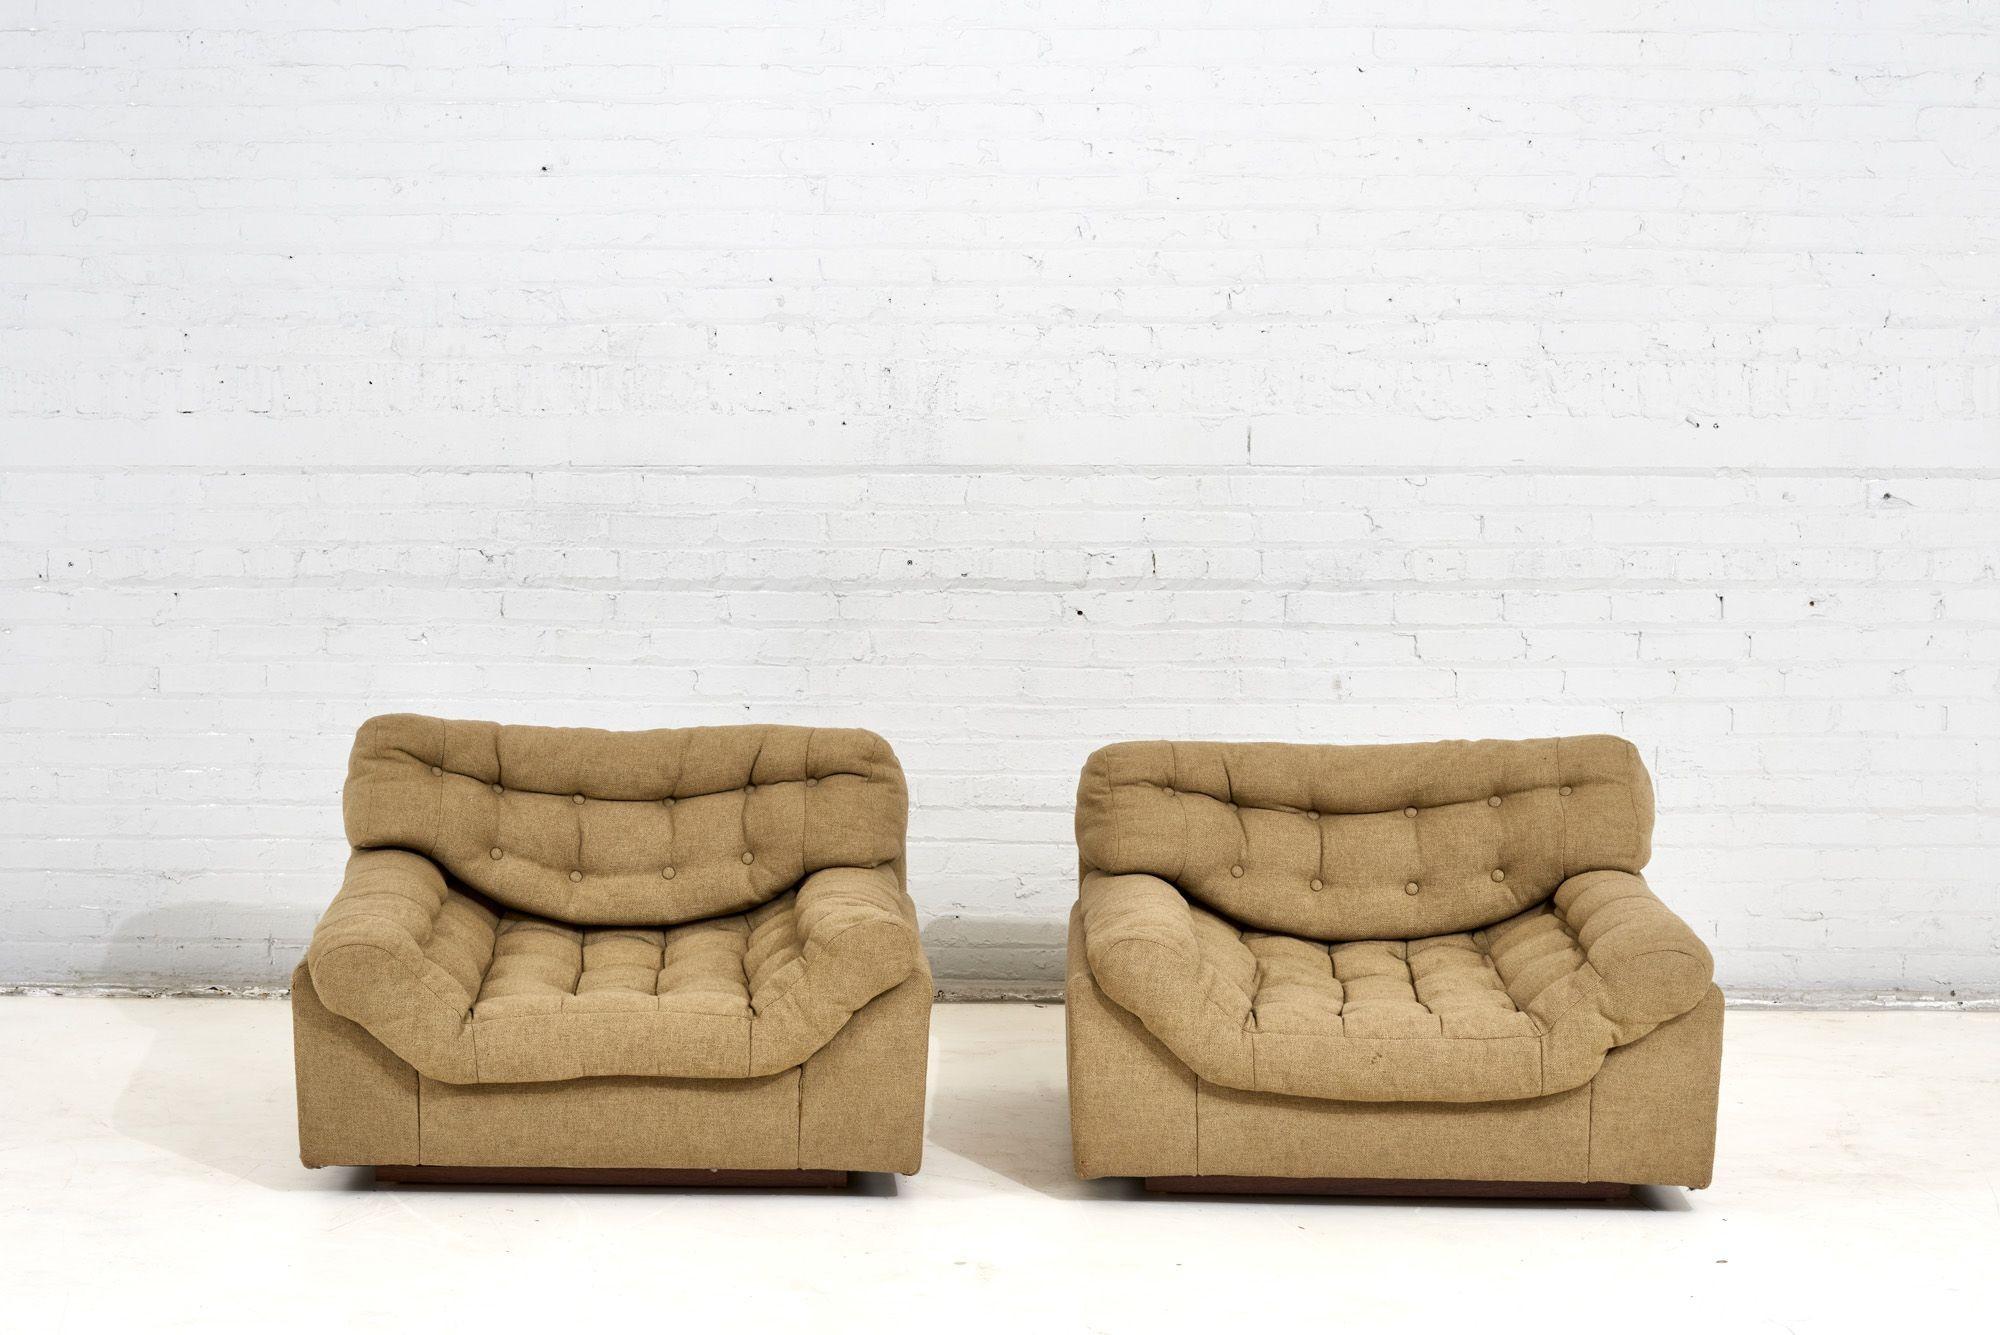 American Modern biscuit tufted lounge chairs with walnut plinth bases, 1960.  Original upholstery.